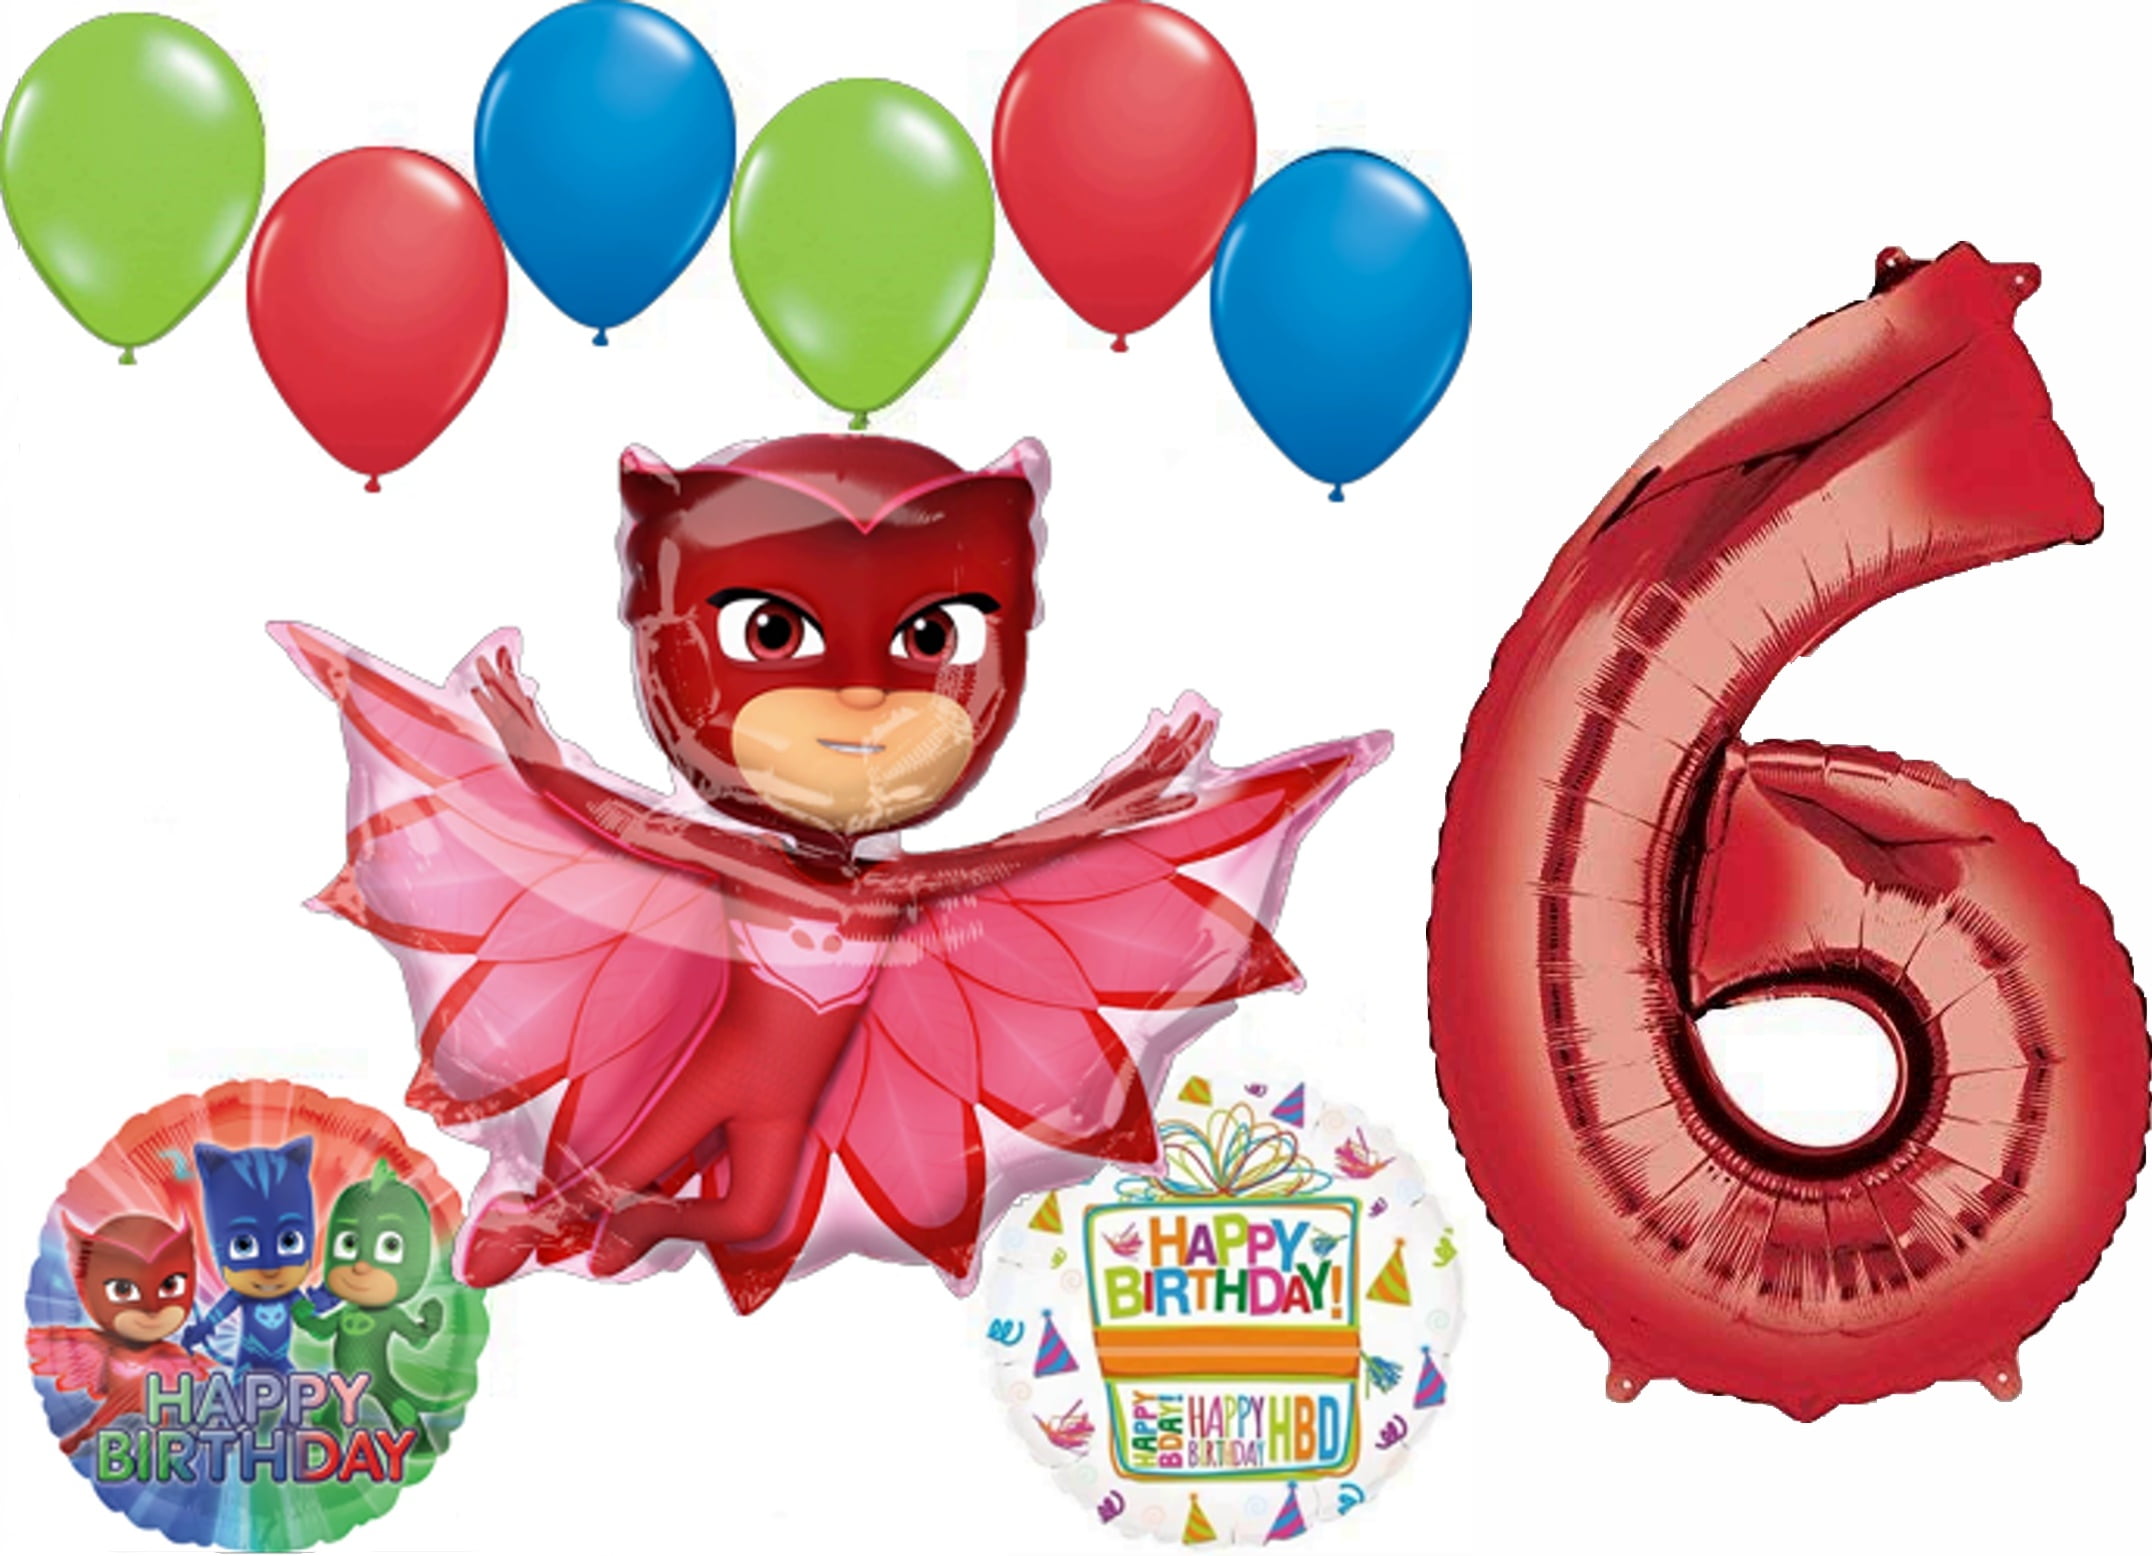 Mayflower Products PJ Masks Owlette Birthday Party Supplies Balloon Bouquet Decorations 